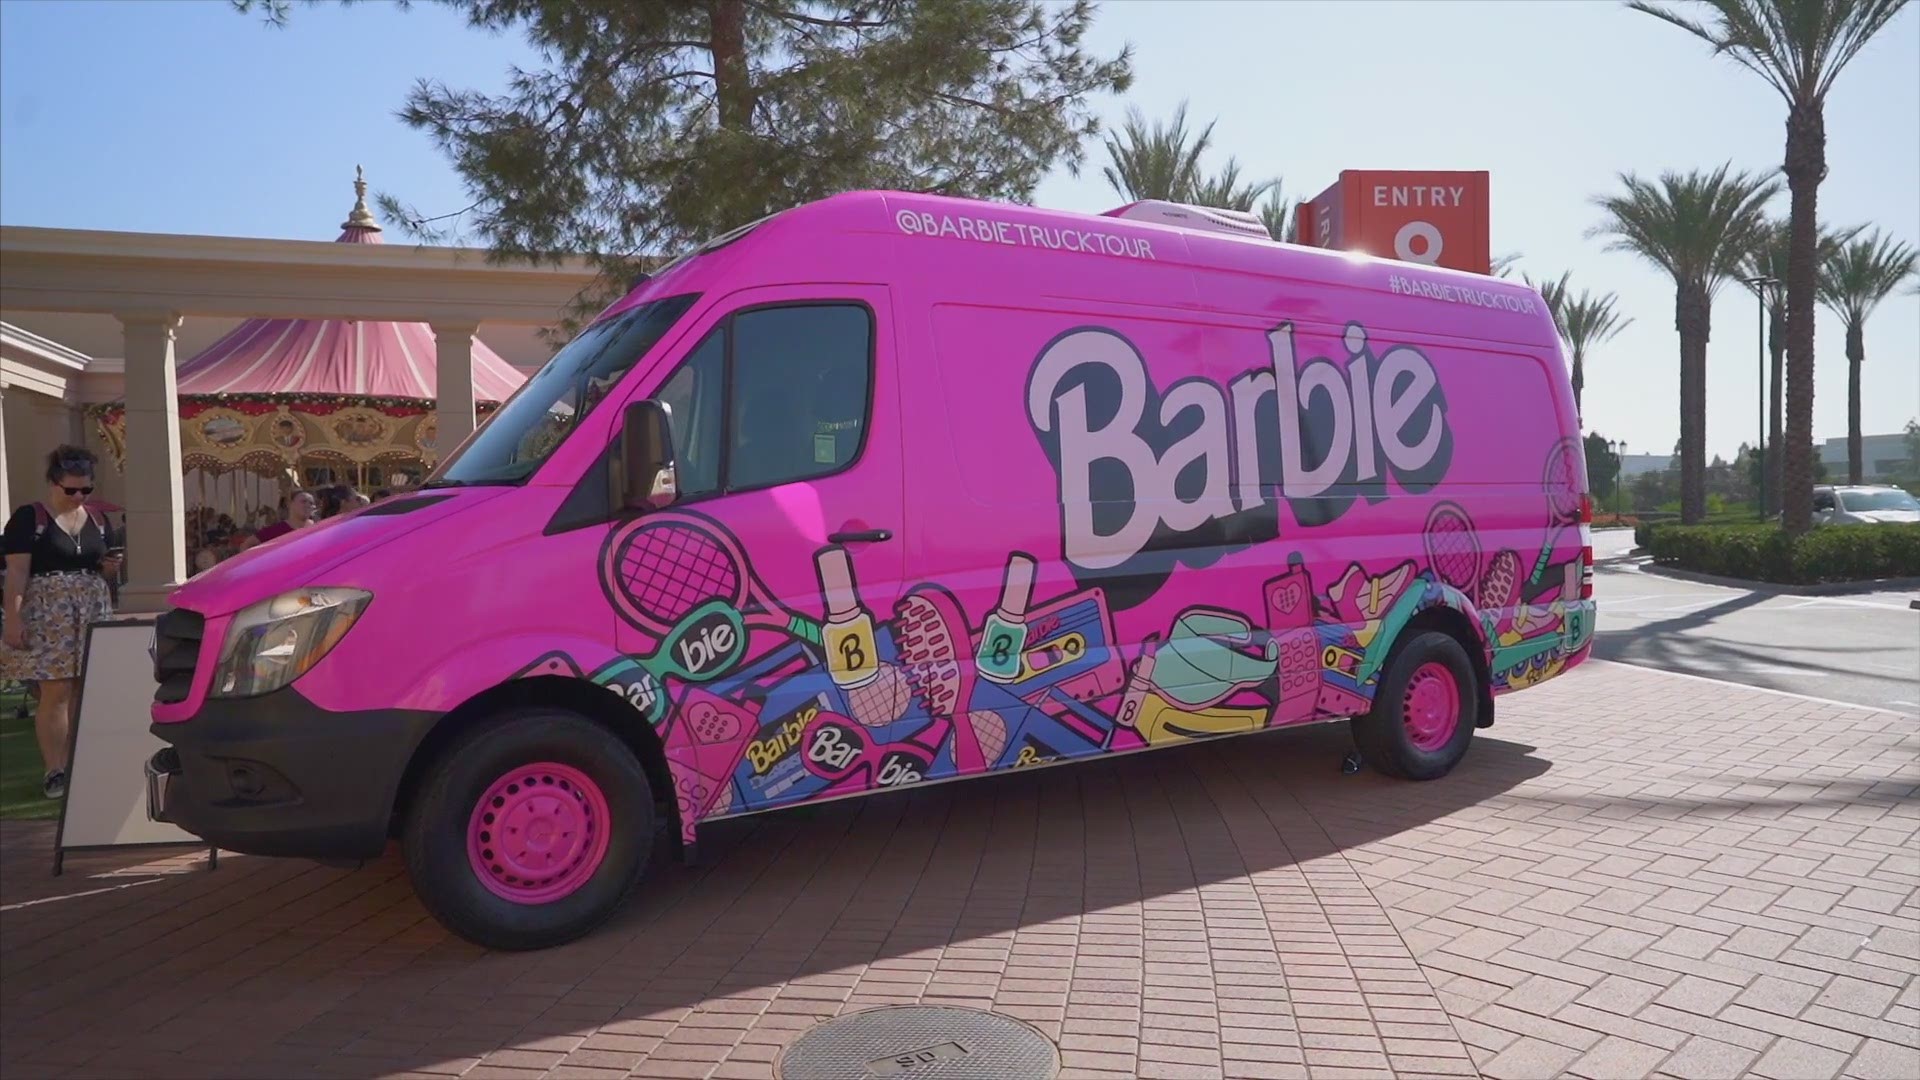 A hot pink Barbie Pop-up Truck is heading to St. Louis on Saturday, Feb. 27. Video provided by: Barbie Totally Throwback Tour